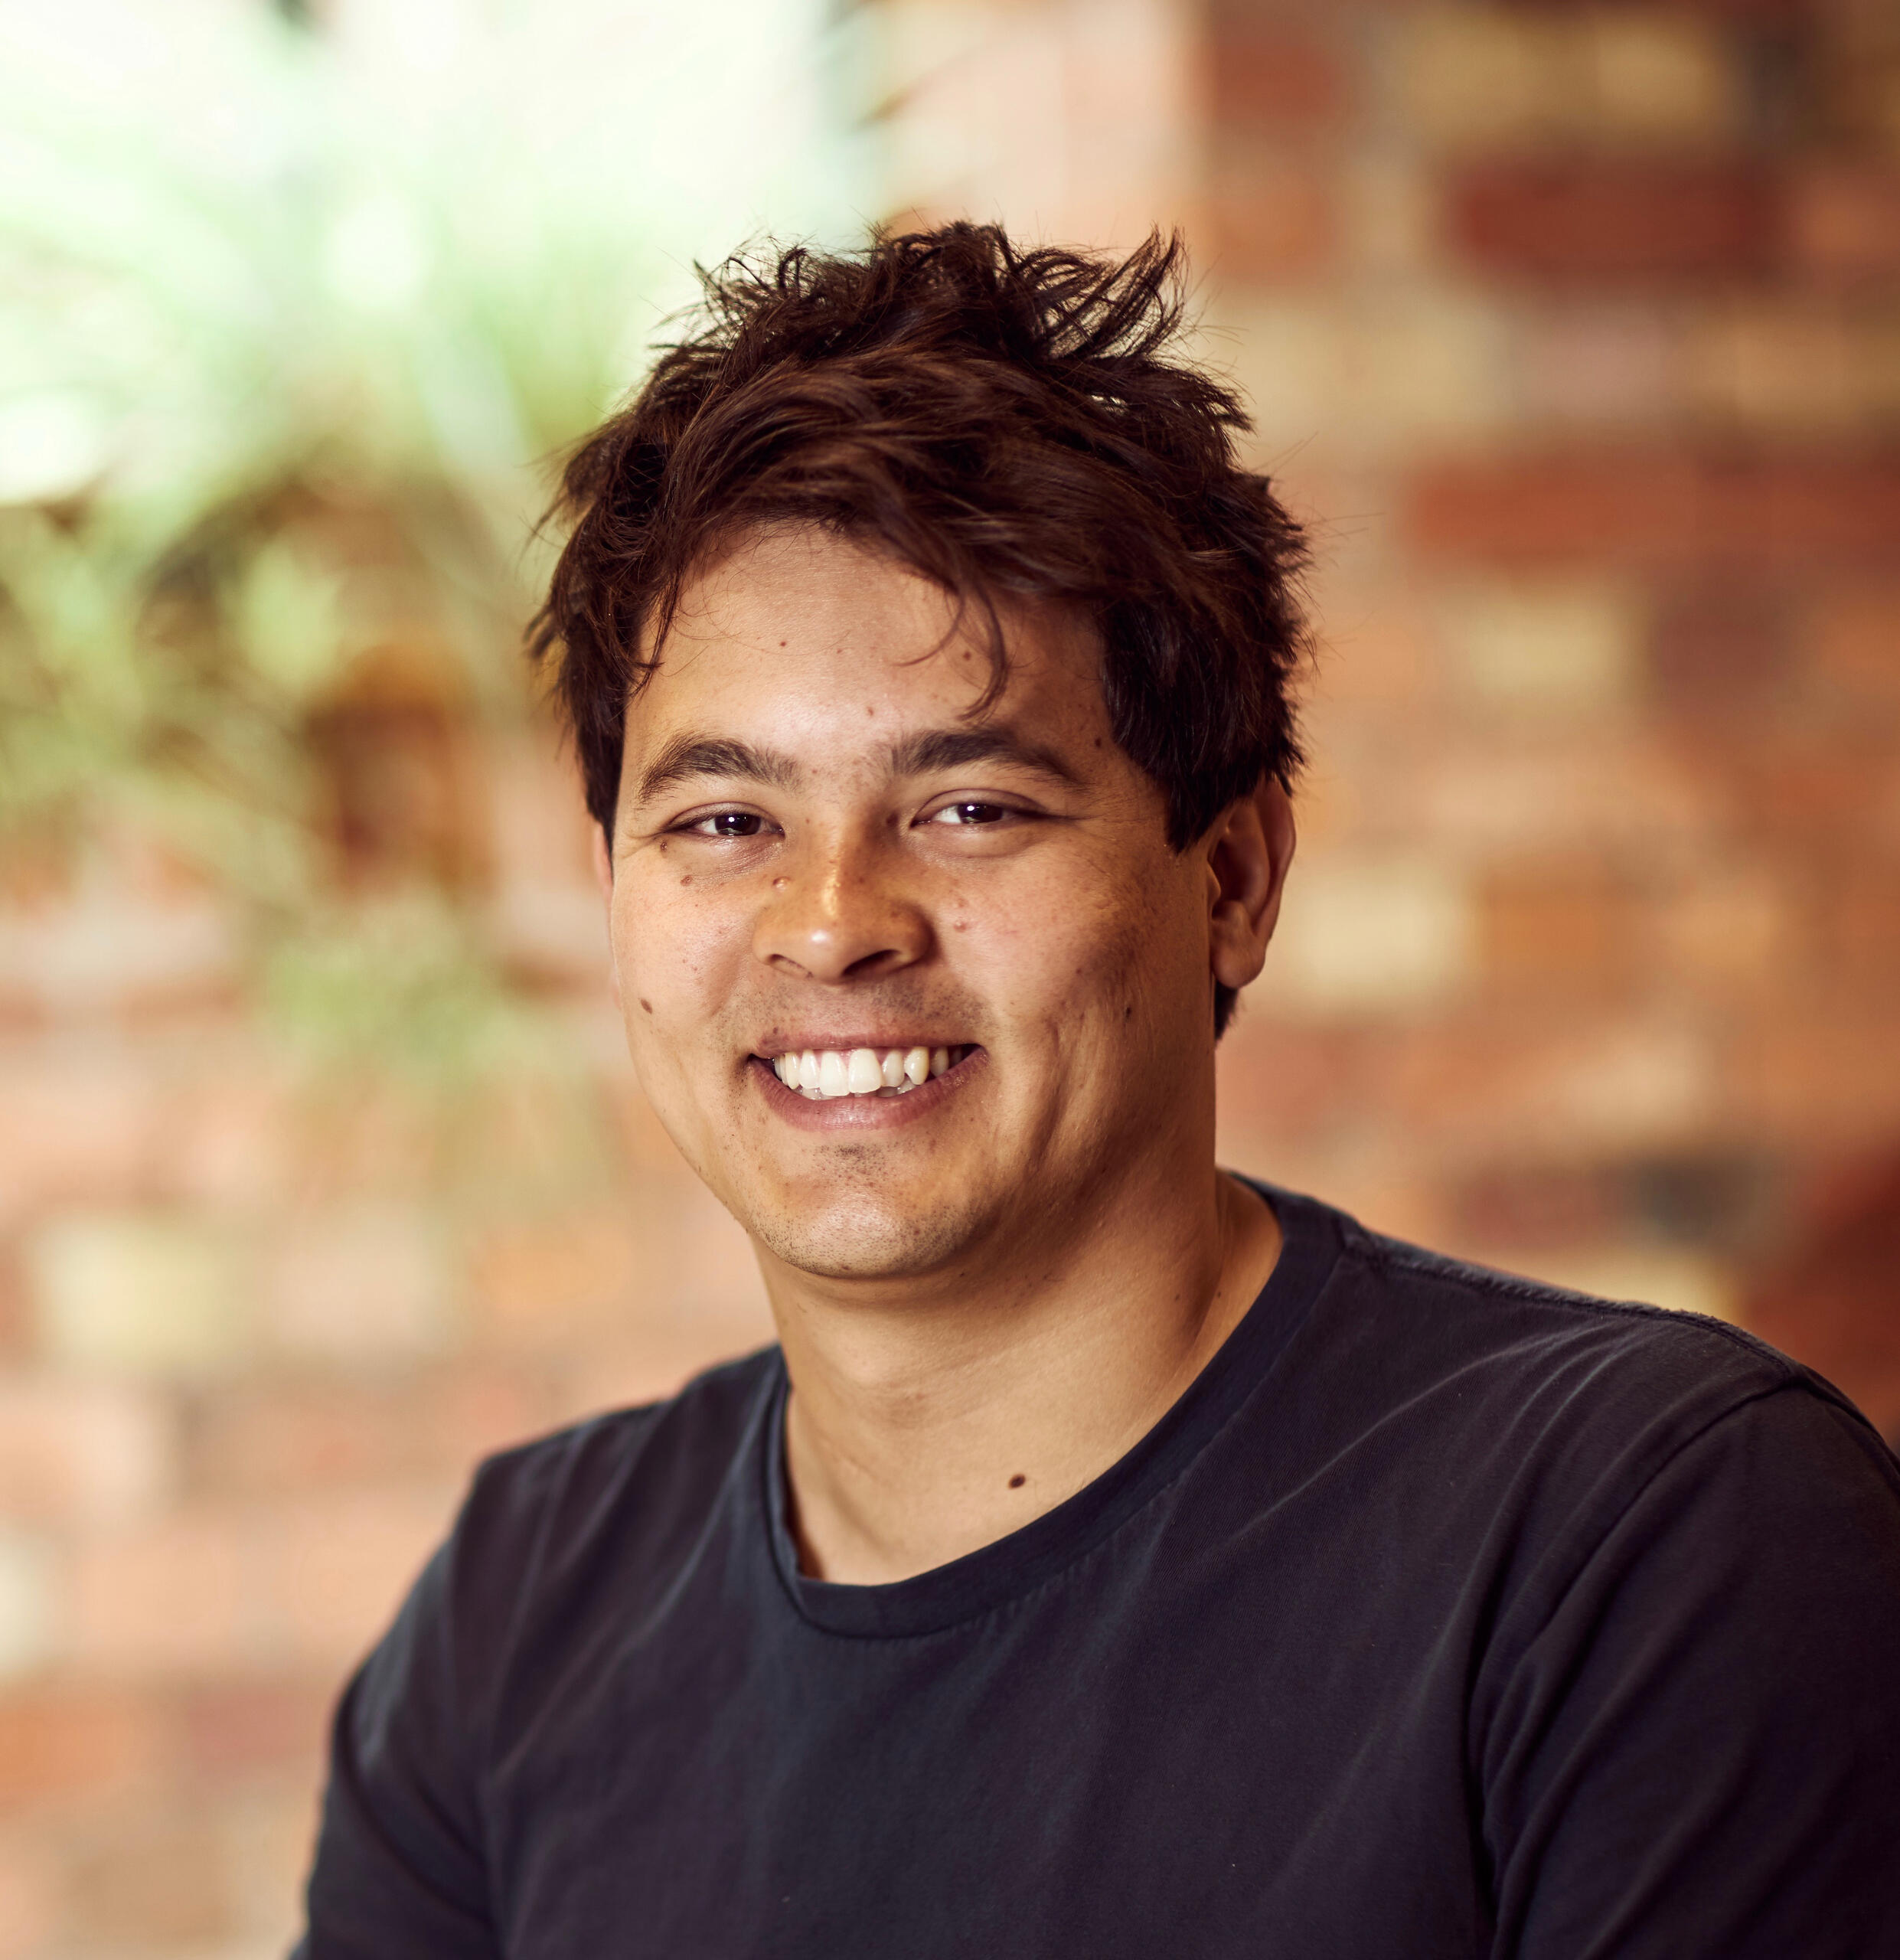 Headshot of Matt. Matt is a mixed-race 30-something year old male with short black hair, brown eyes and wearing a blue t-shirt whilst smiling at the camera